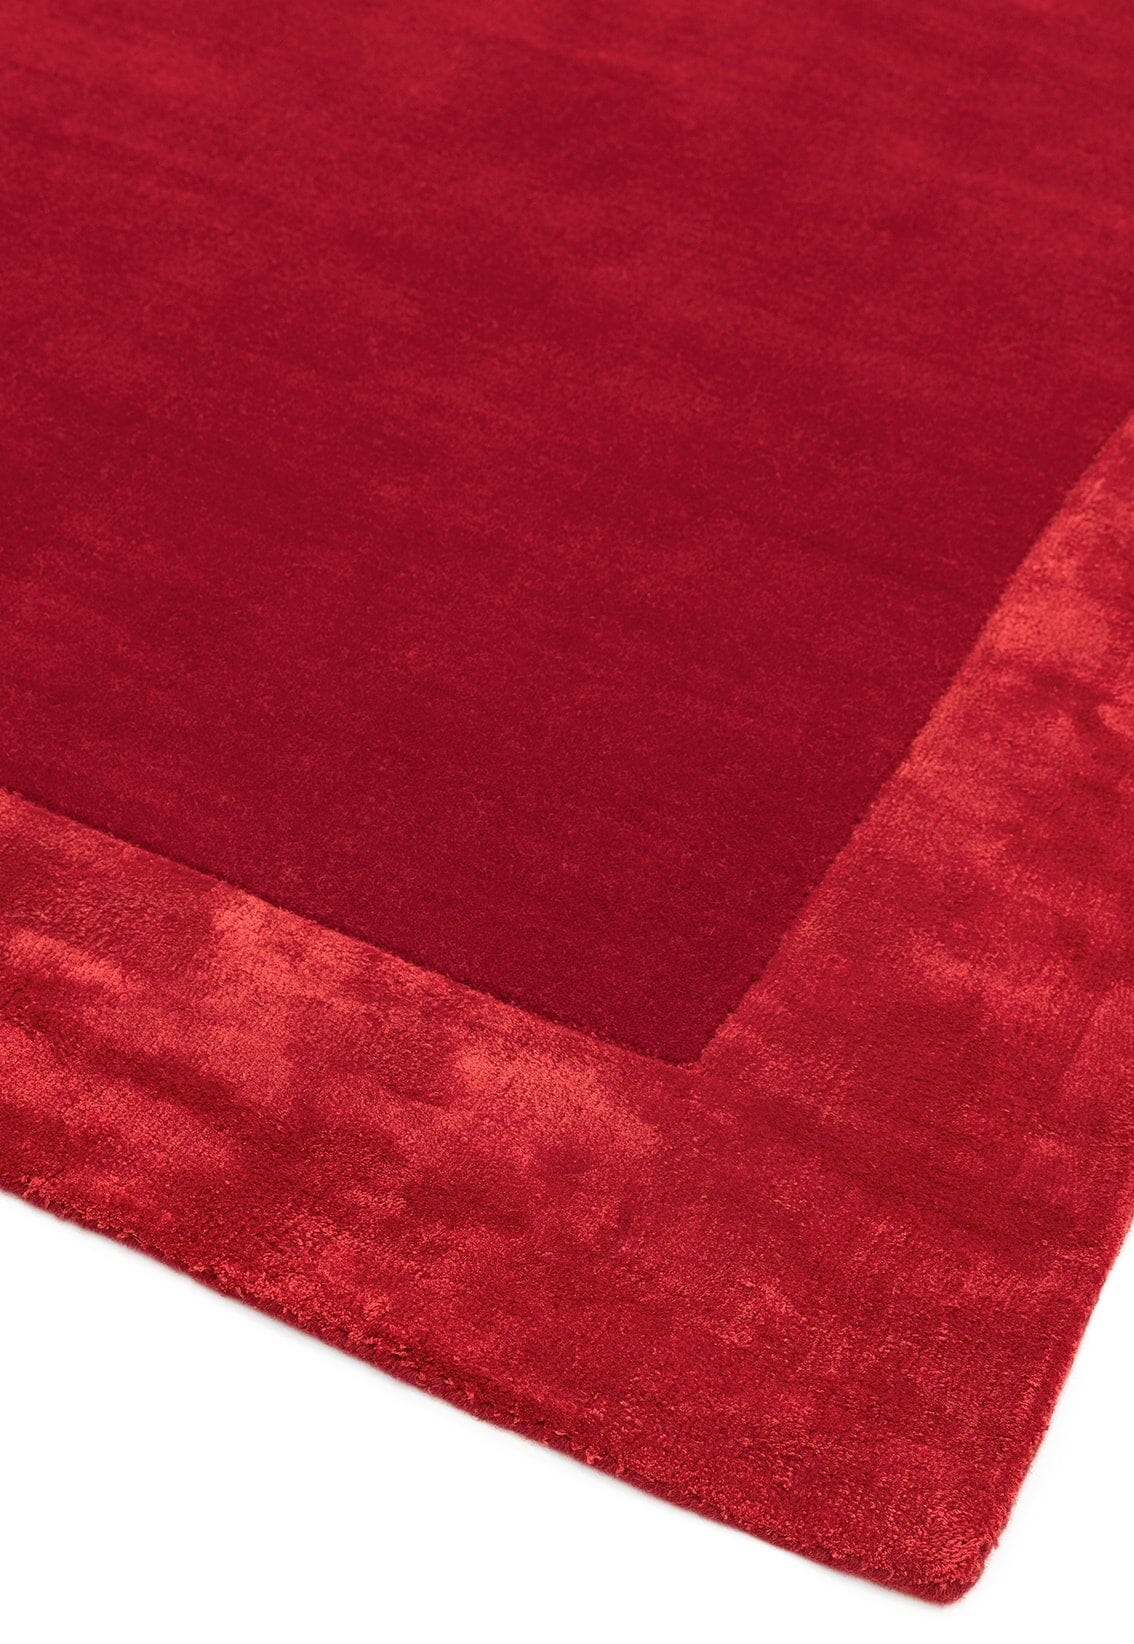  Asiatic Carpets-Asiatic Carpets Ascot Hand Woven Rug Red - 160 x 230cm-Red 069 